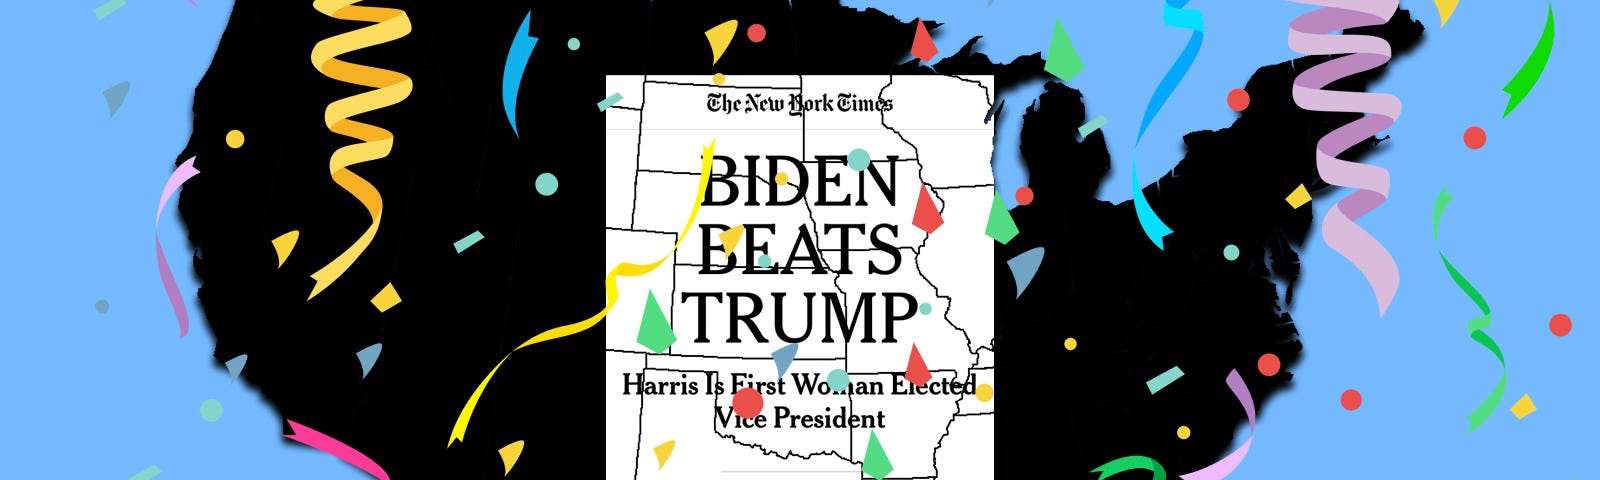 A silhouette of the United States with the New York Times headline, “Biden Beats Trump” on top. Confetti surrounds it.